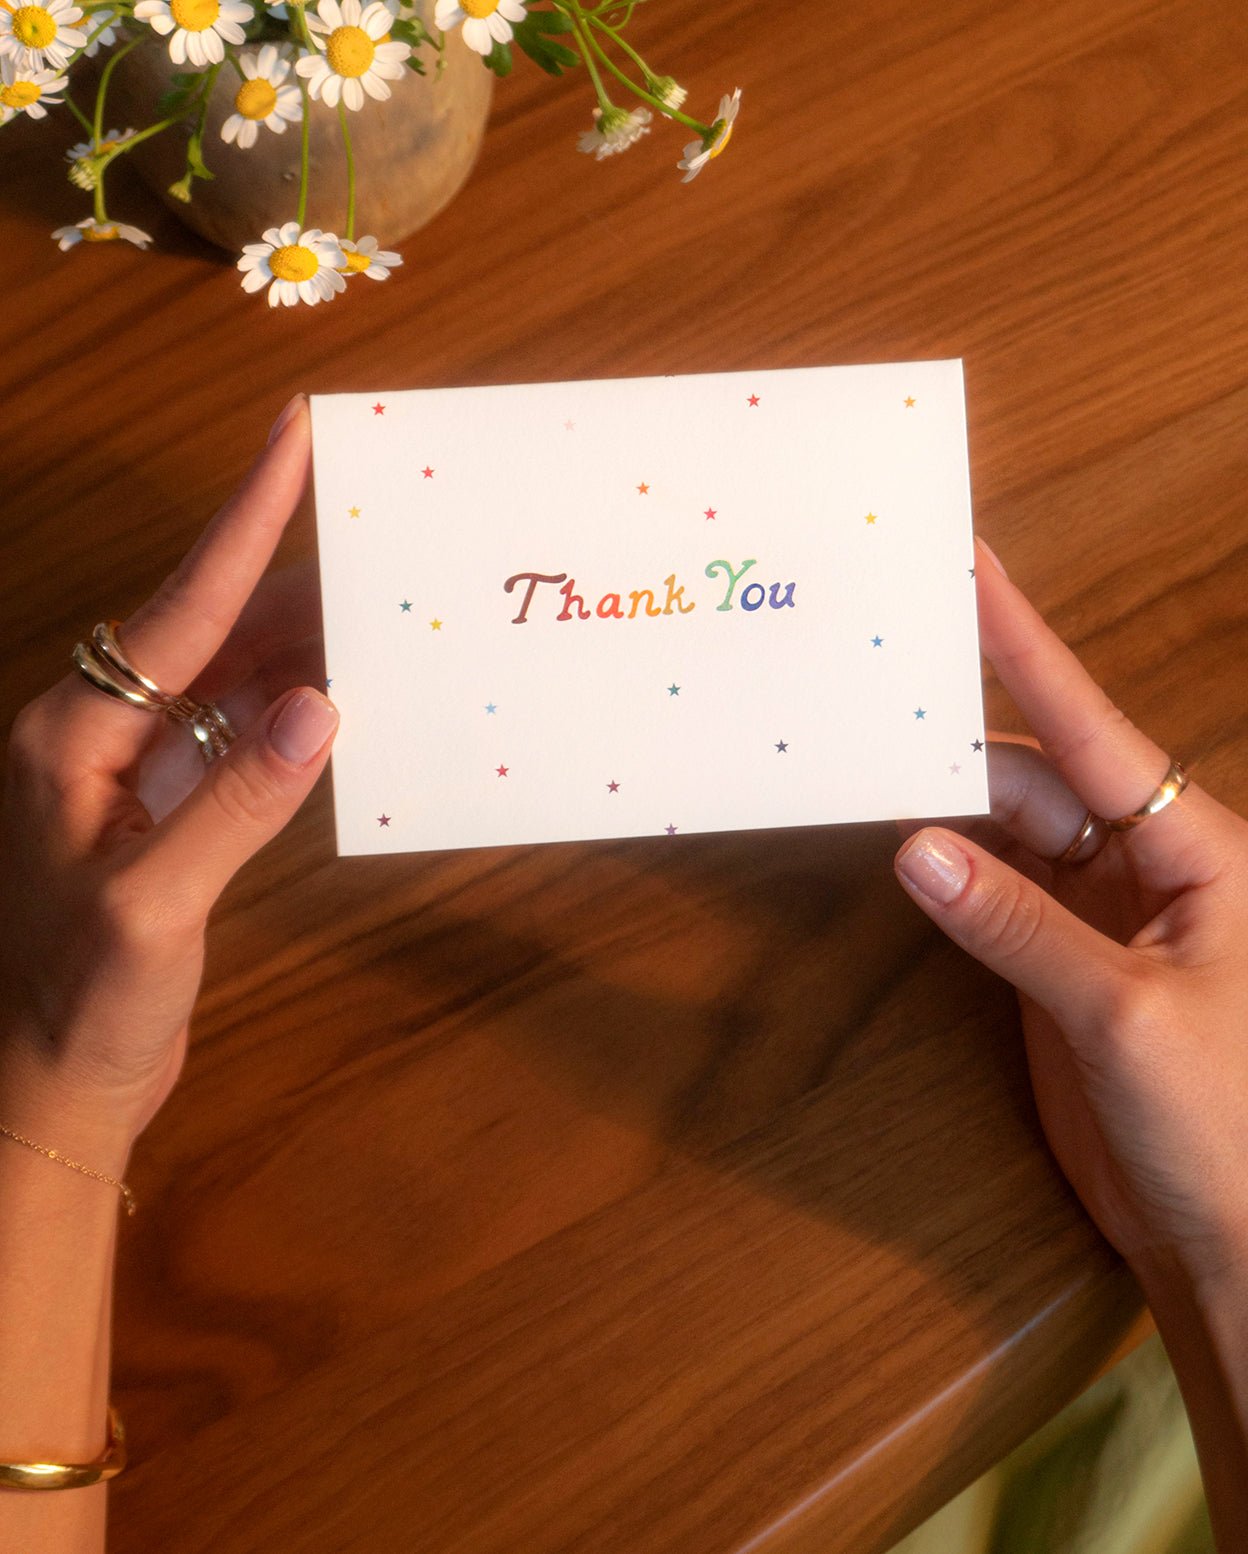  Rainbow stars thank you card with rainbow colored letters printed on white cardstock. Hands modeling card above a wood surface with white flowers in a clay pot in the background.